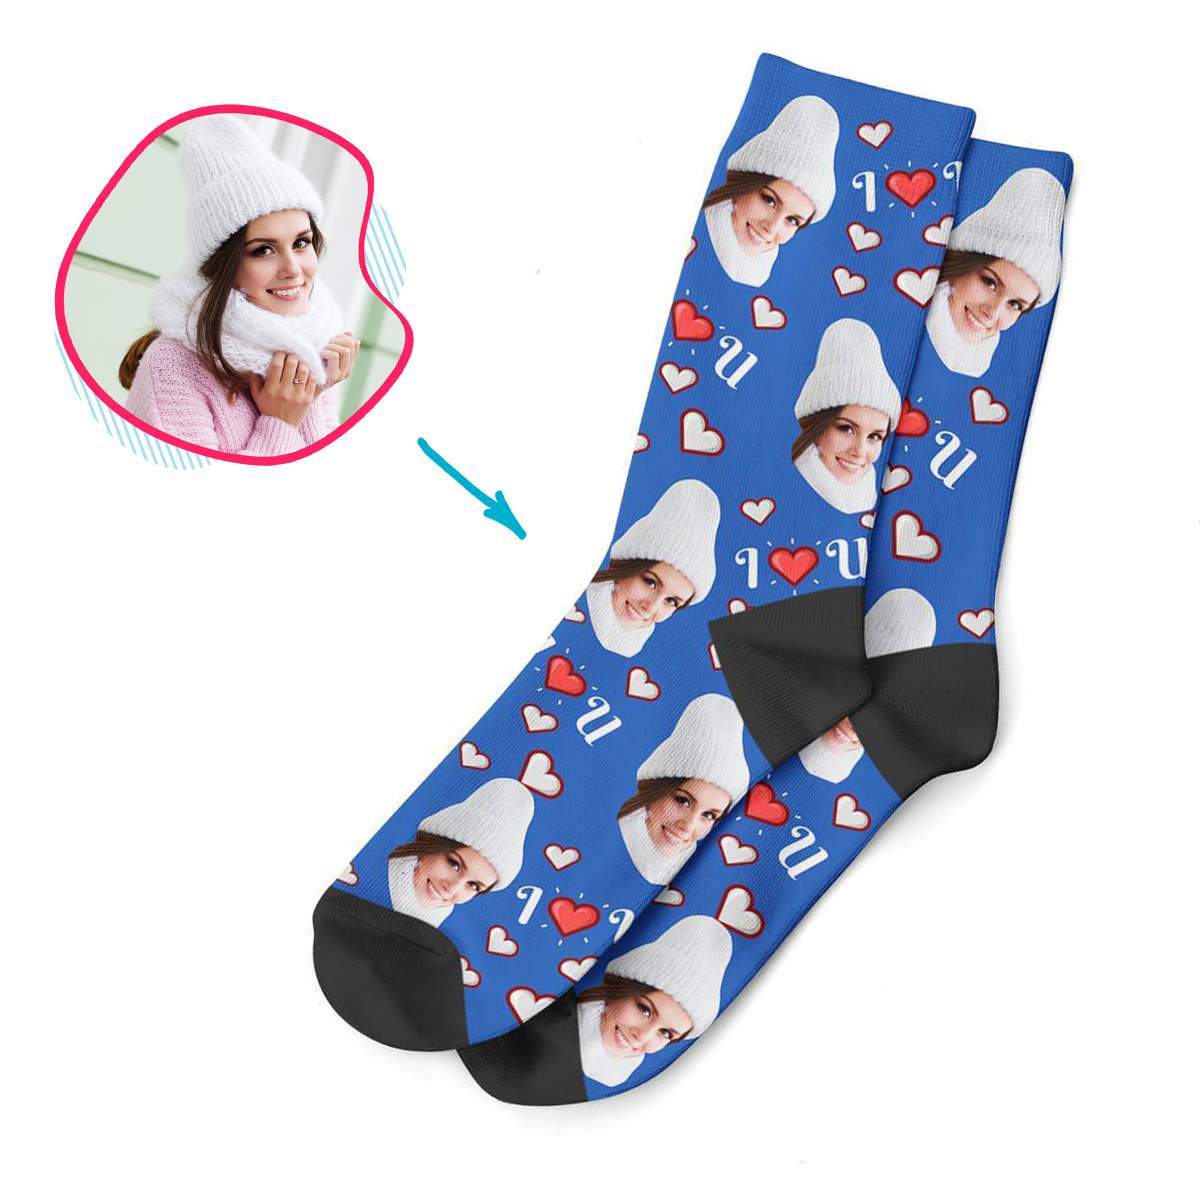 darkblue I <3 You socks personalized with photo of face printed on them